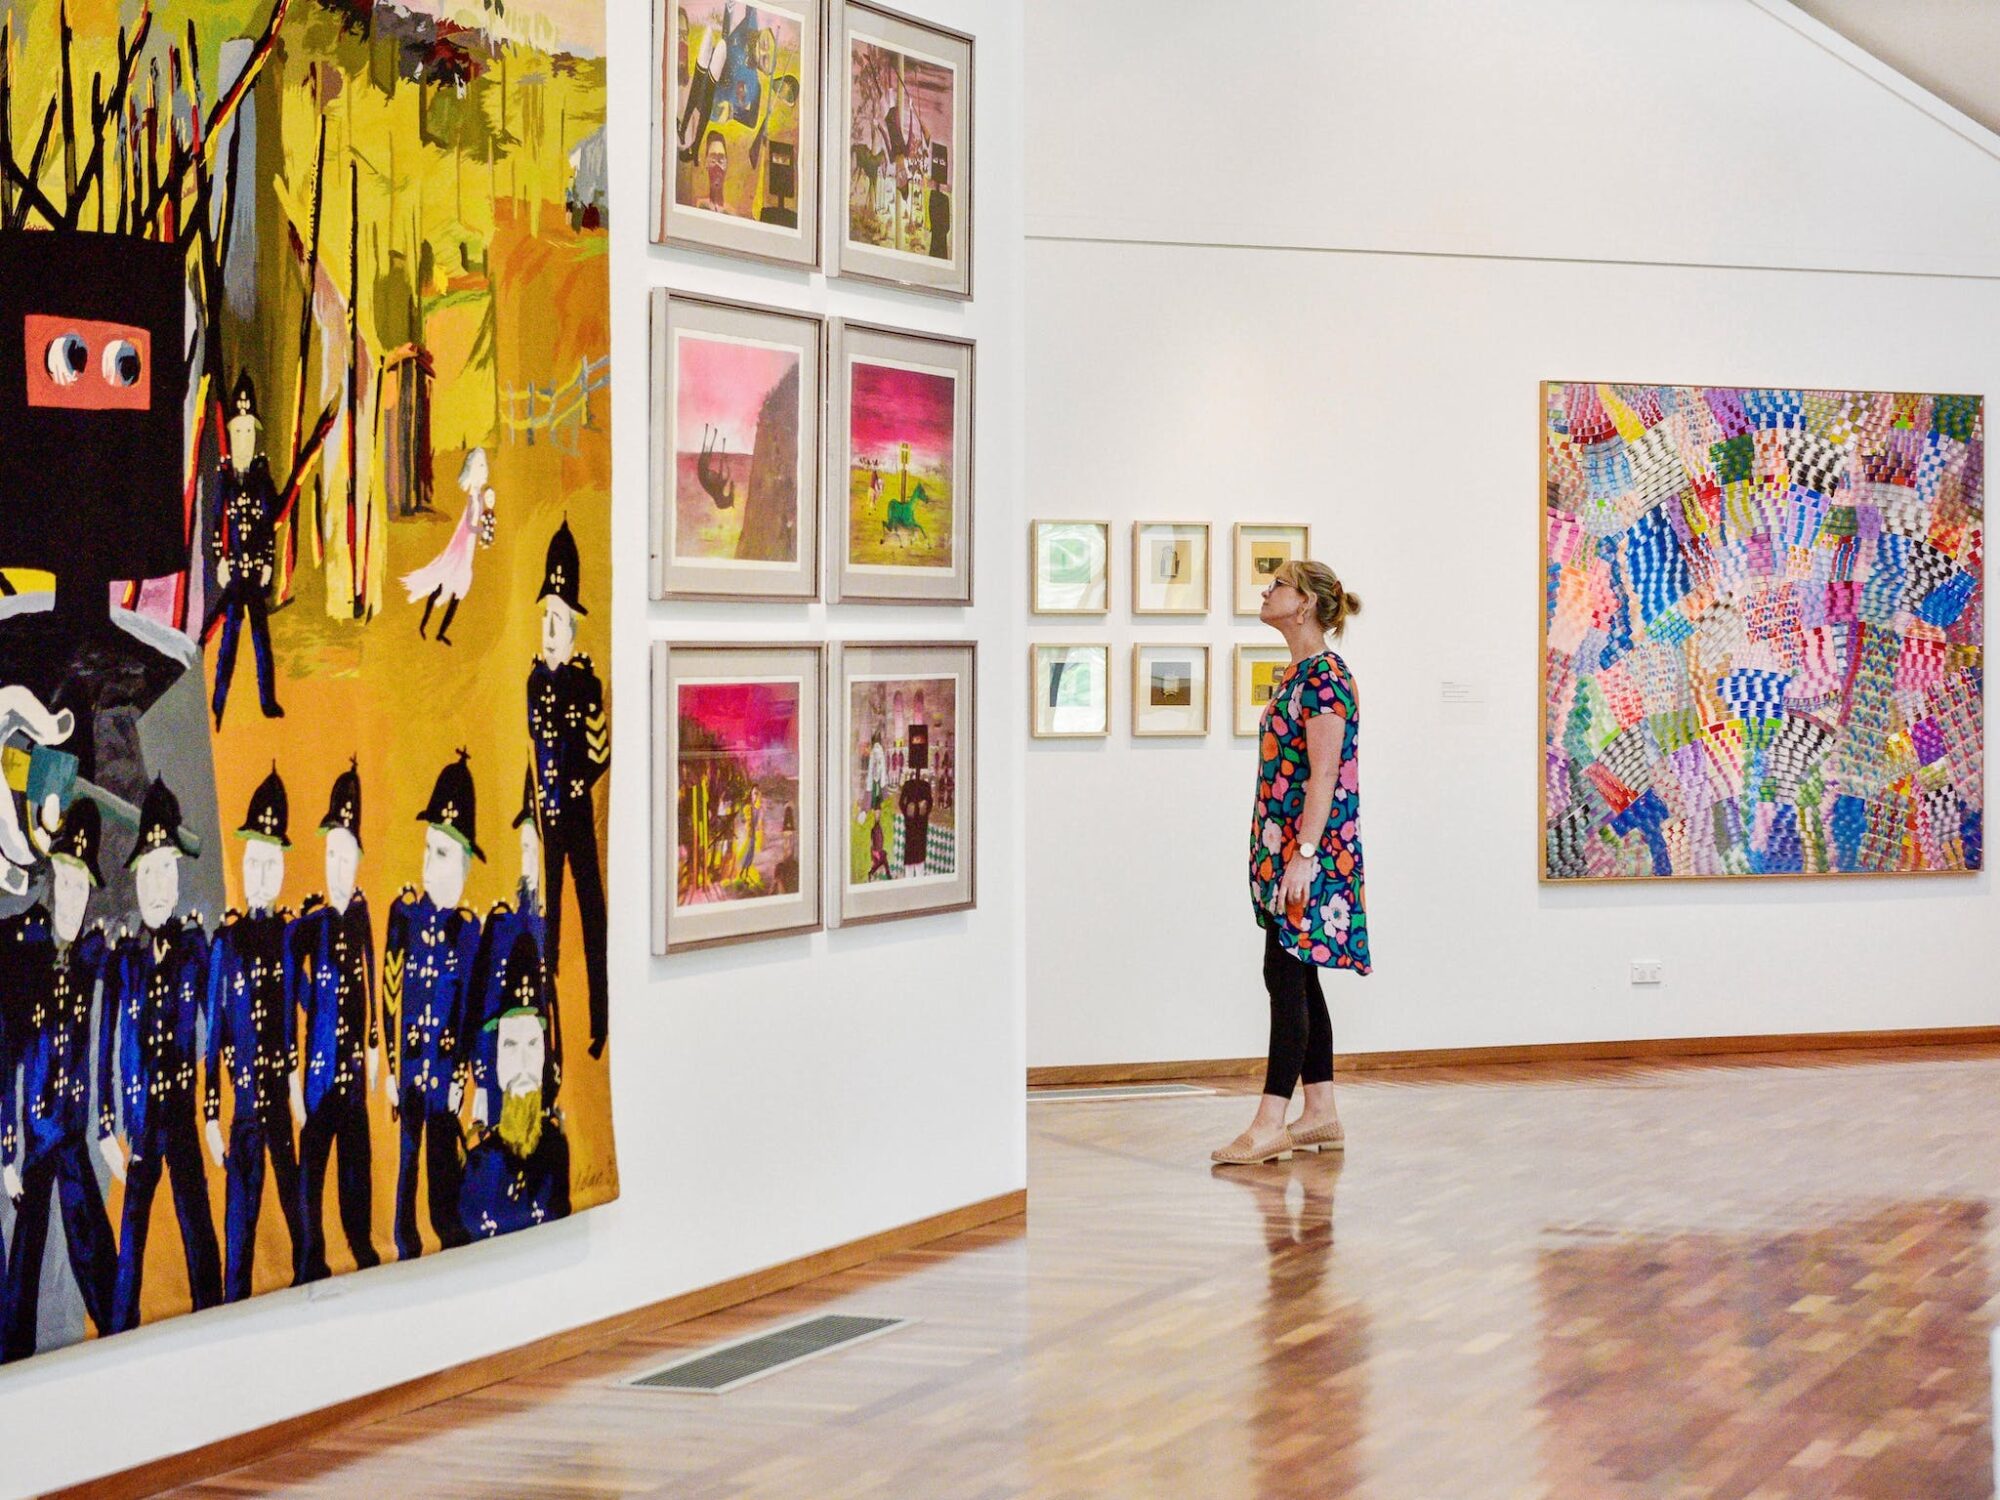 Future Perfect: Celebrating 50 Years of Benalla Art Gallery, collection exhibition 2018 to 2019